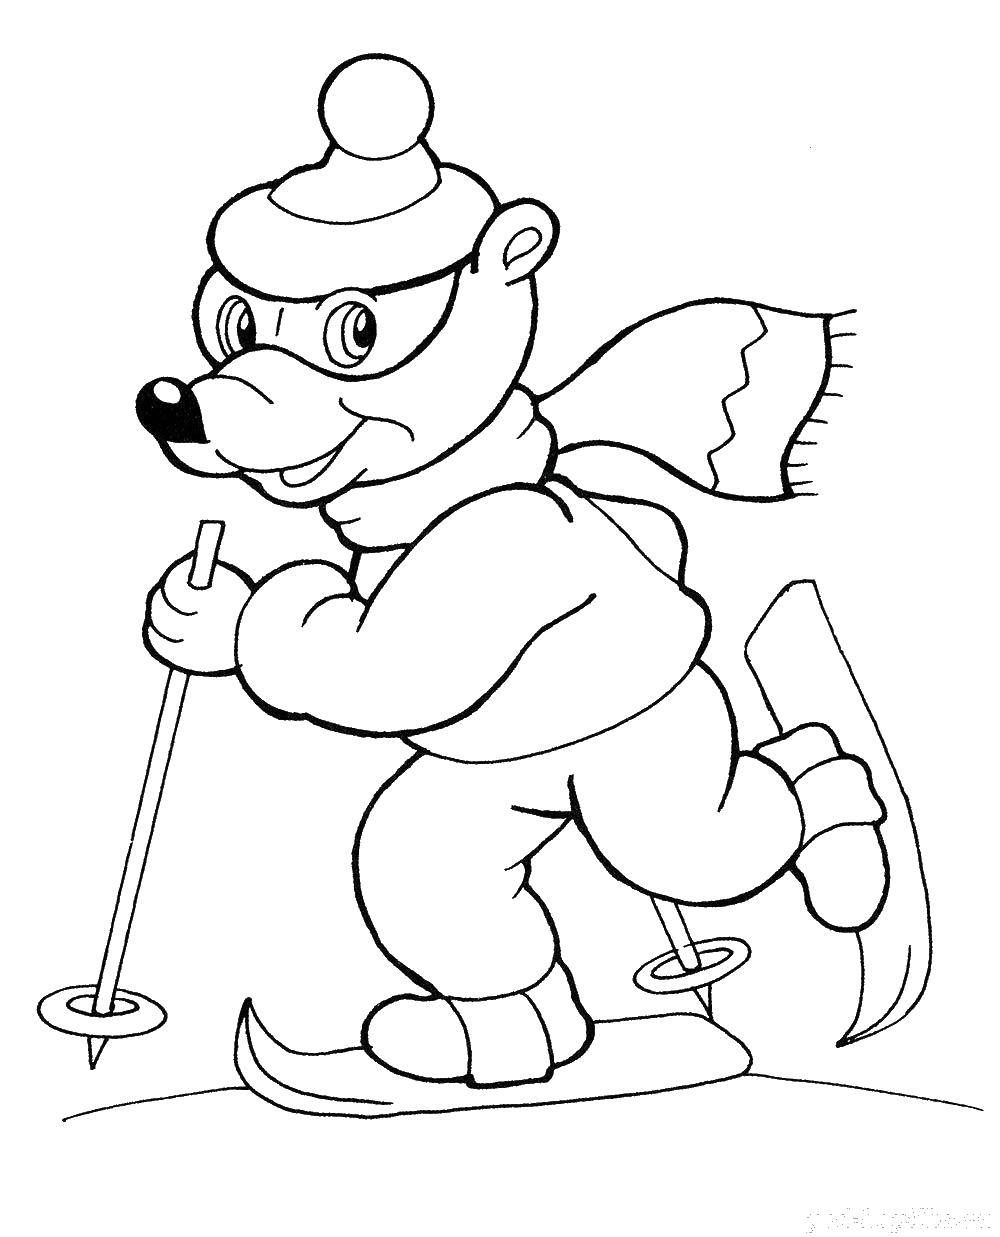 Coloring Mickey on the slopes. Category Cartoon character. Tags:  Mickey, skiing.